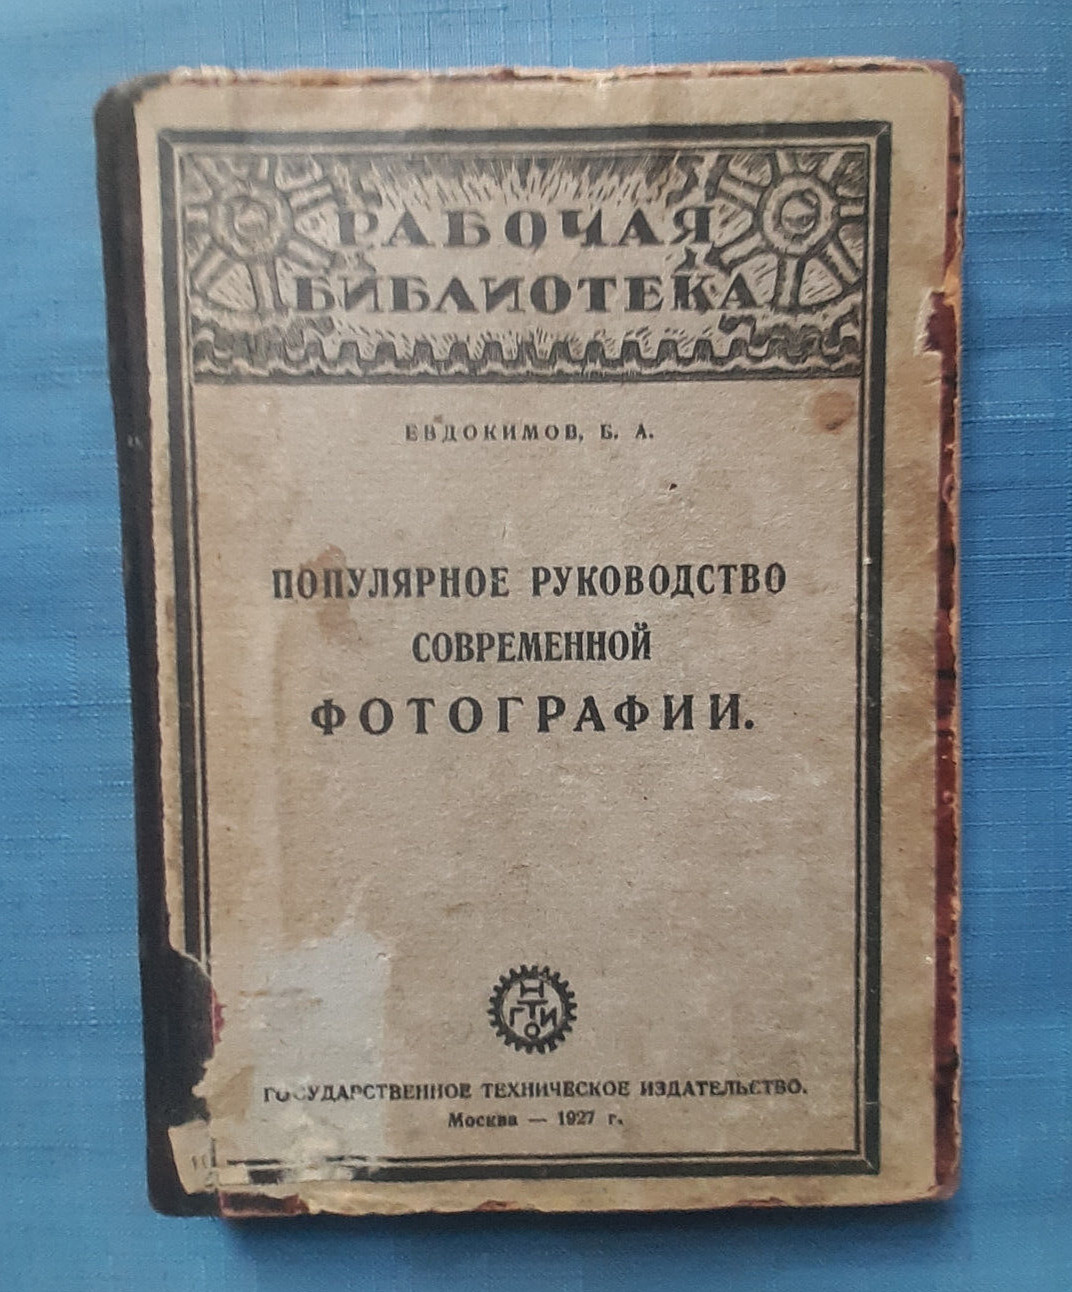 1927 Popular Guide to Modern Photography Handheld Cameras Vintage Russian book